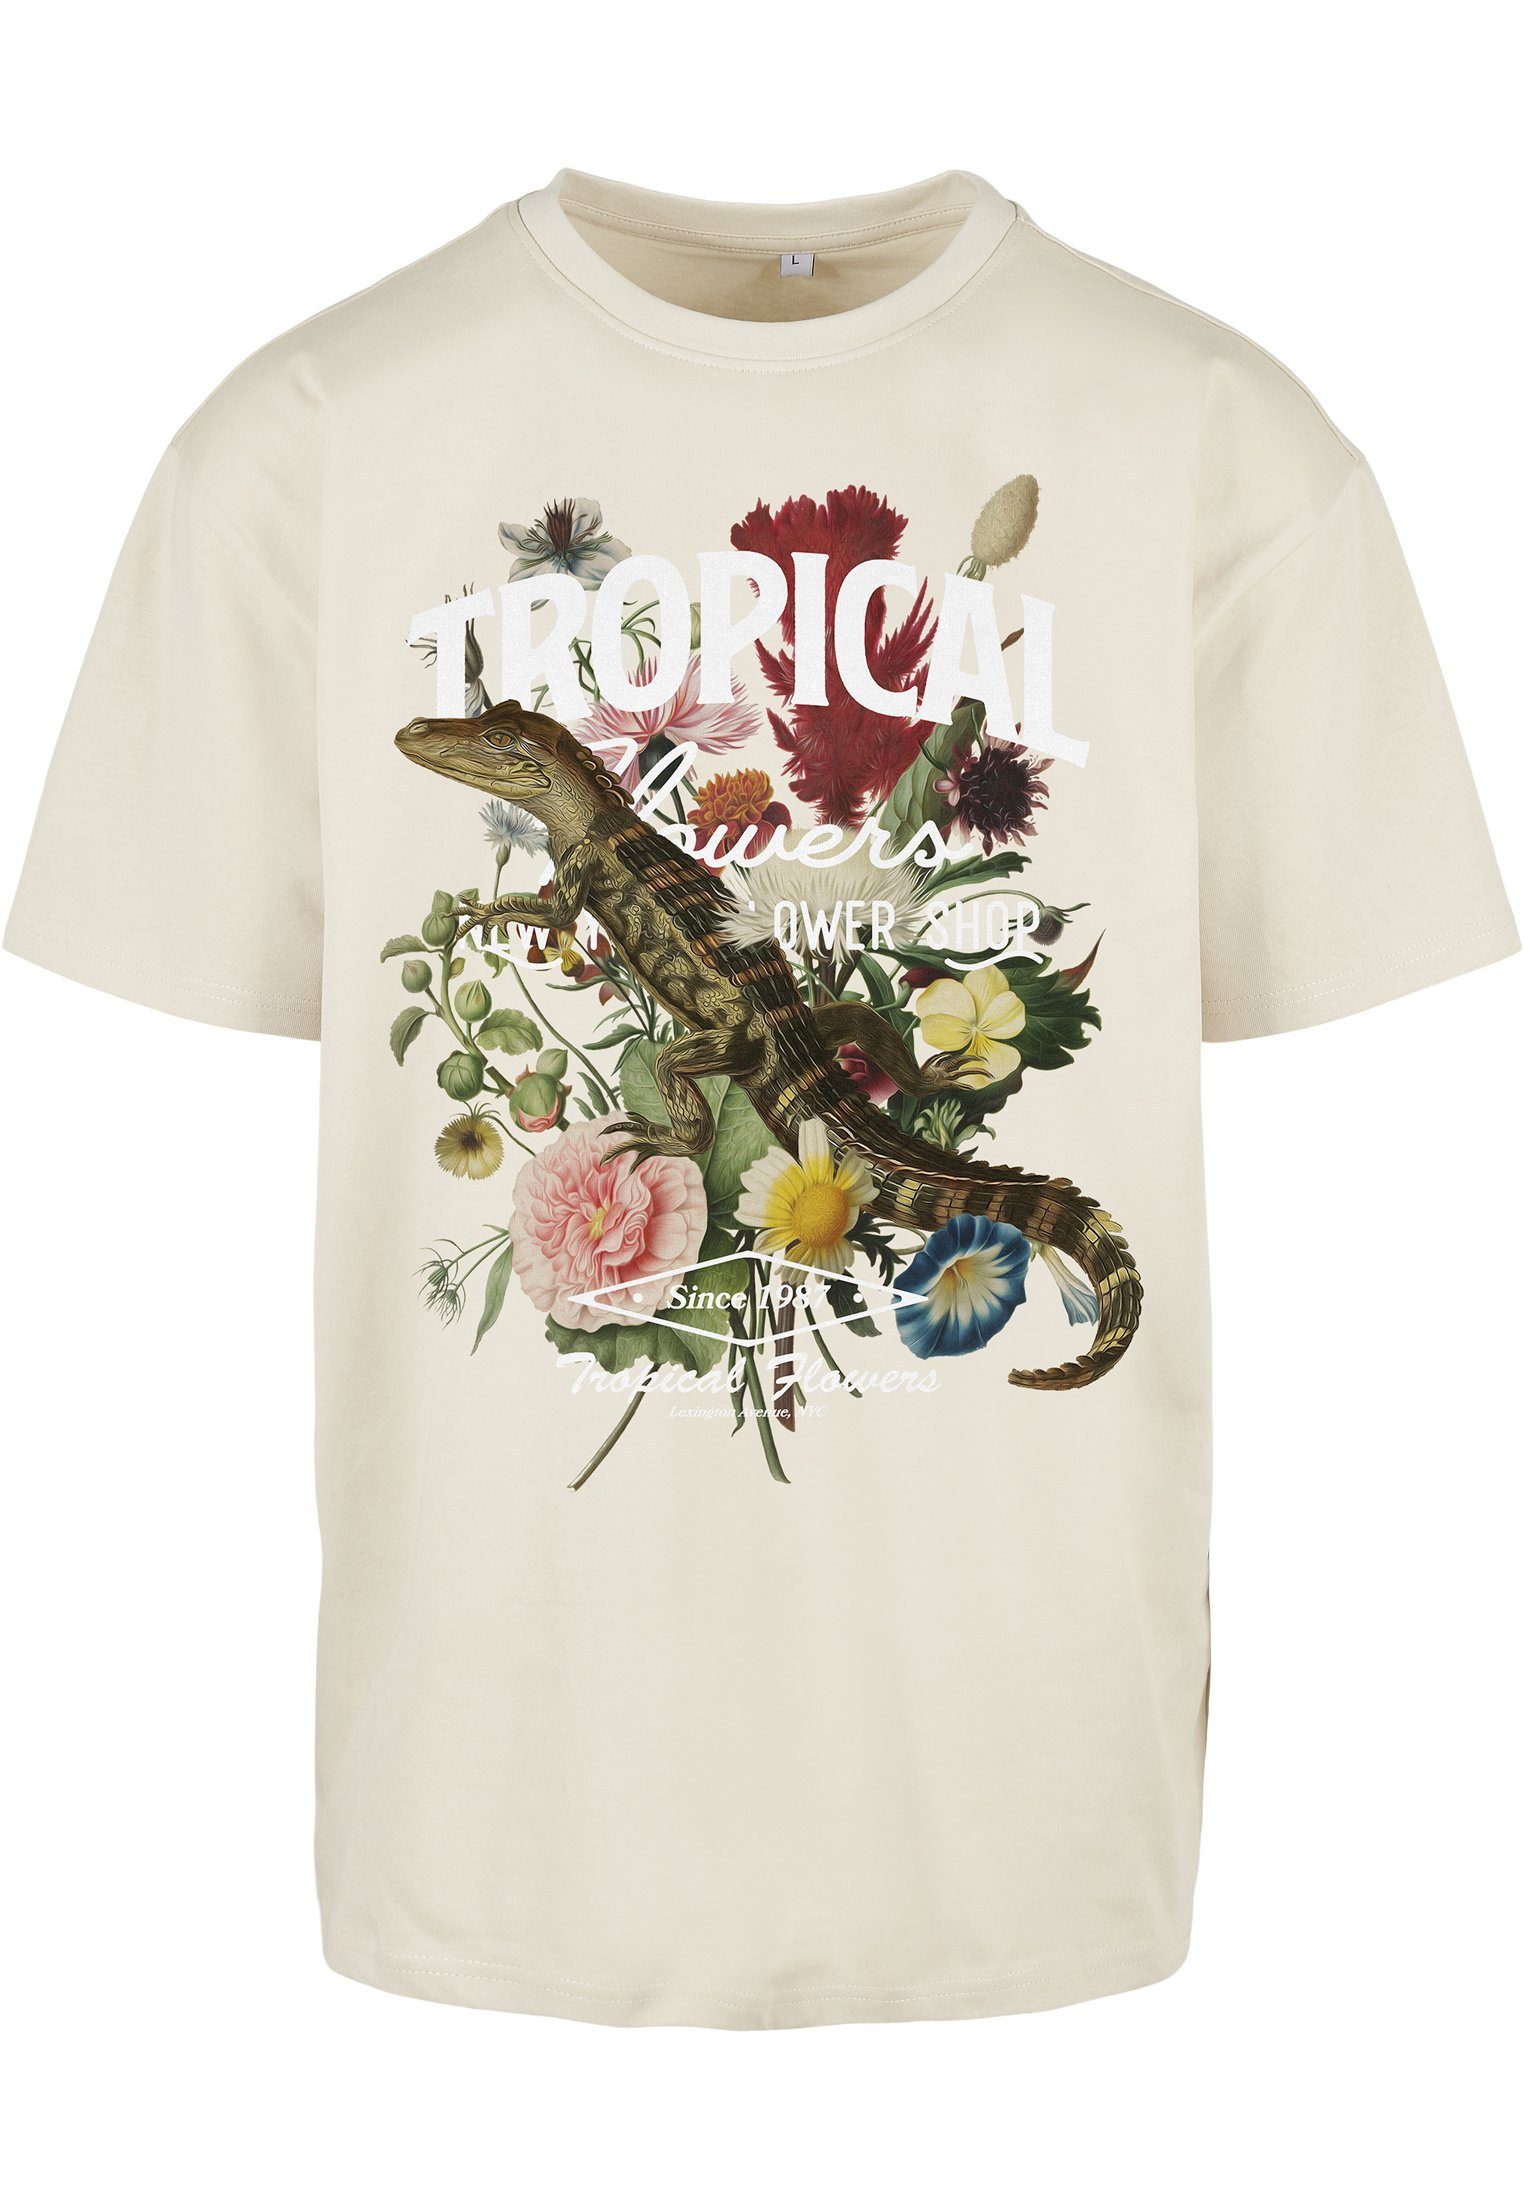 Upscale by Mister Tee T-Shirt Unisex Tropical Oversize Tee (1-tlg)